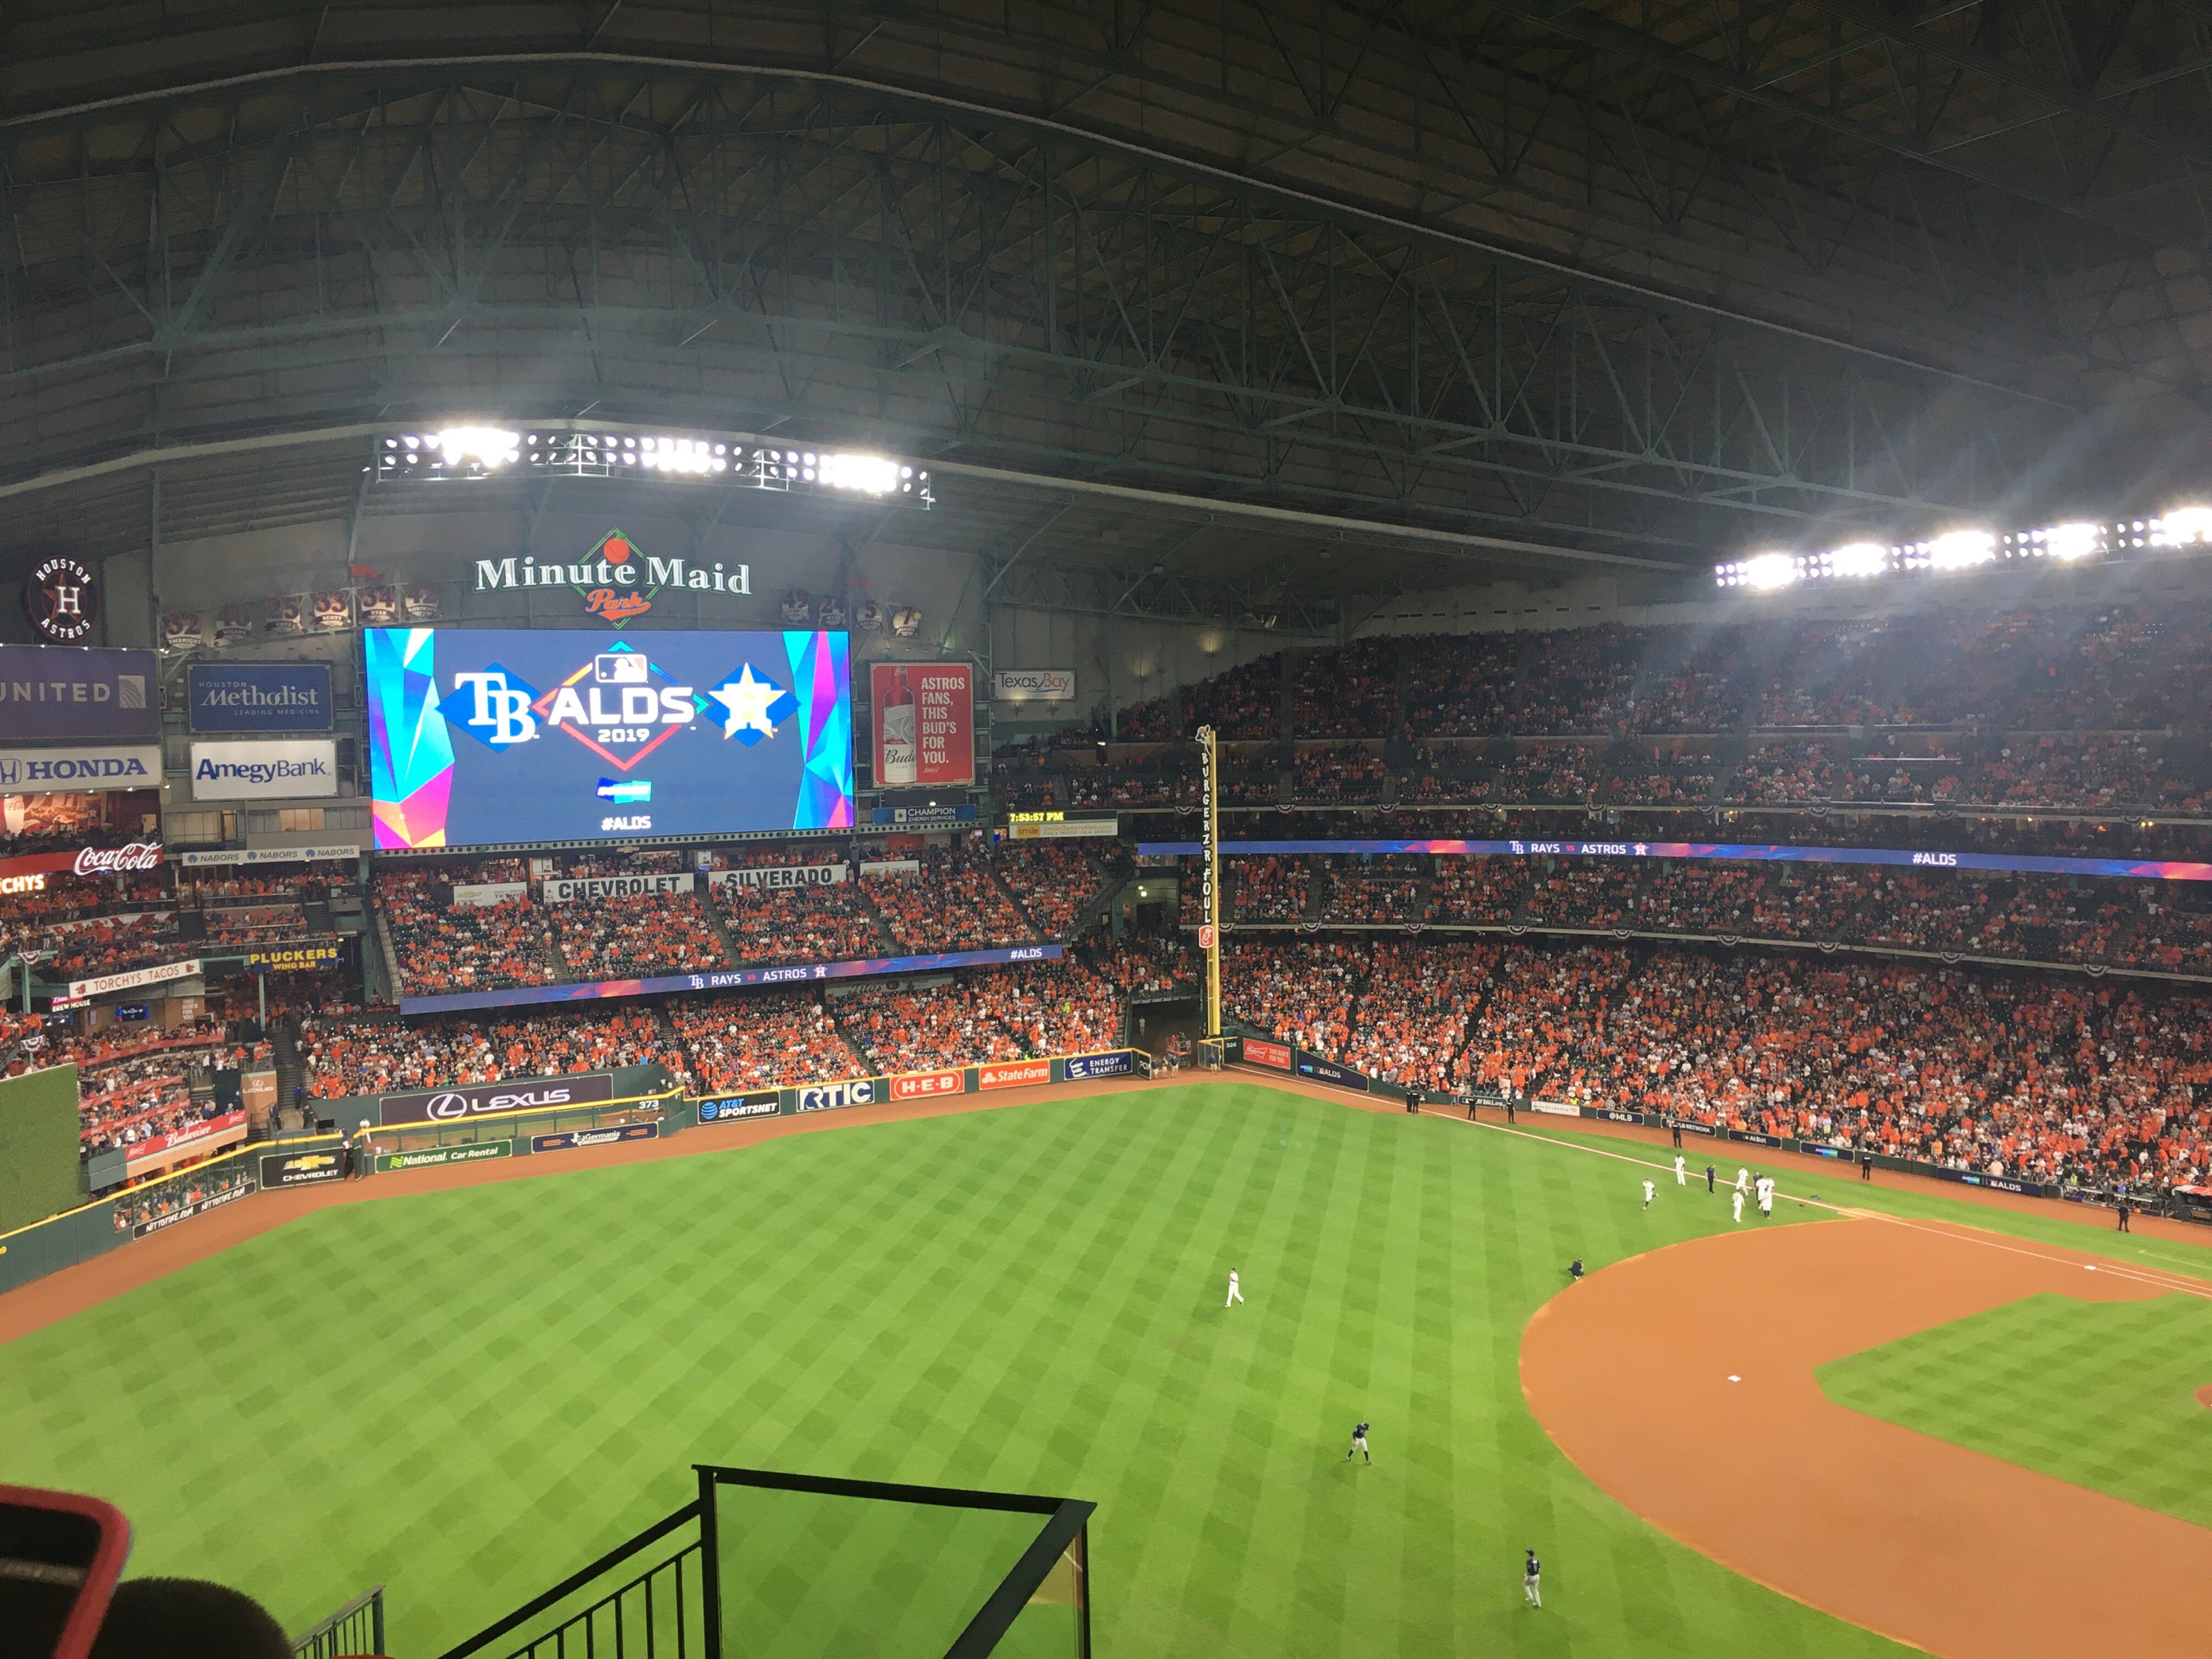 The Stadium is Minute Maid Park. Minute Maid Park is the home field of the Houston Astros